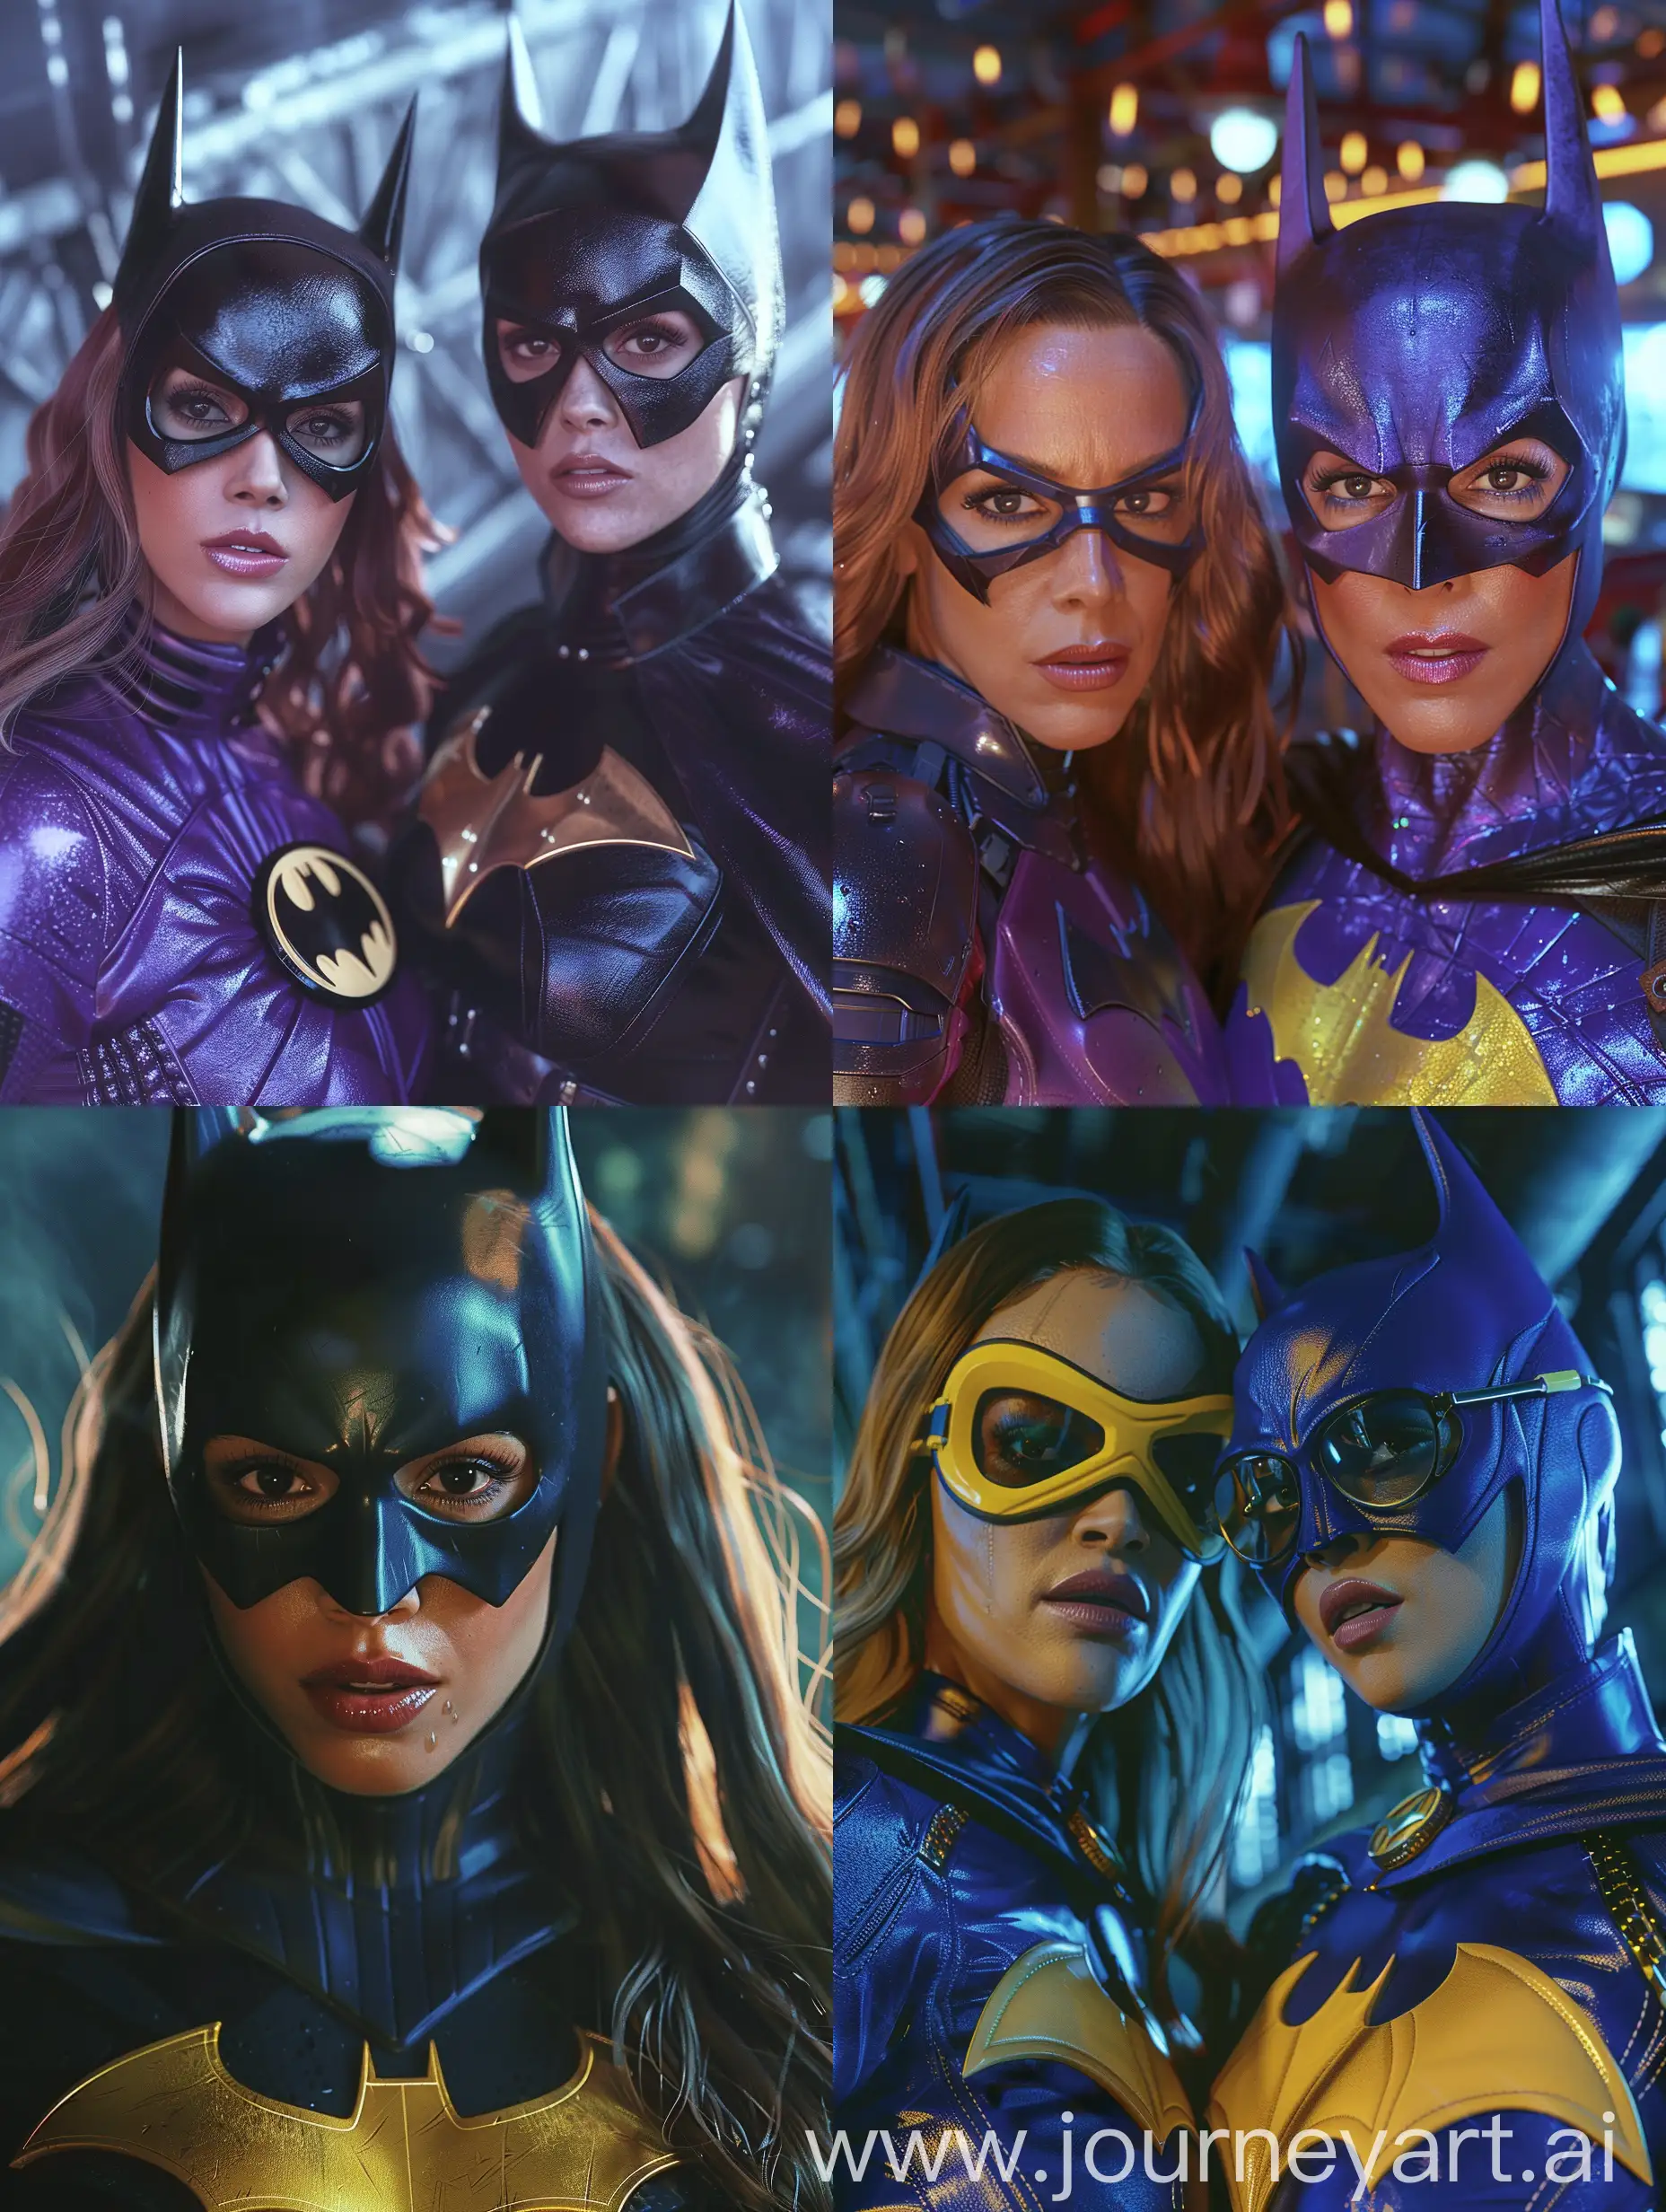 Jeniffer Lopez and Katy Perry as Batgirl Movie kodak portra camera f1.6 lens rich hyper realistic colors lifelike textures dramatic lighting unreal machines trending in cinema arttation time 